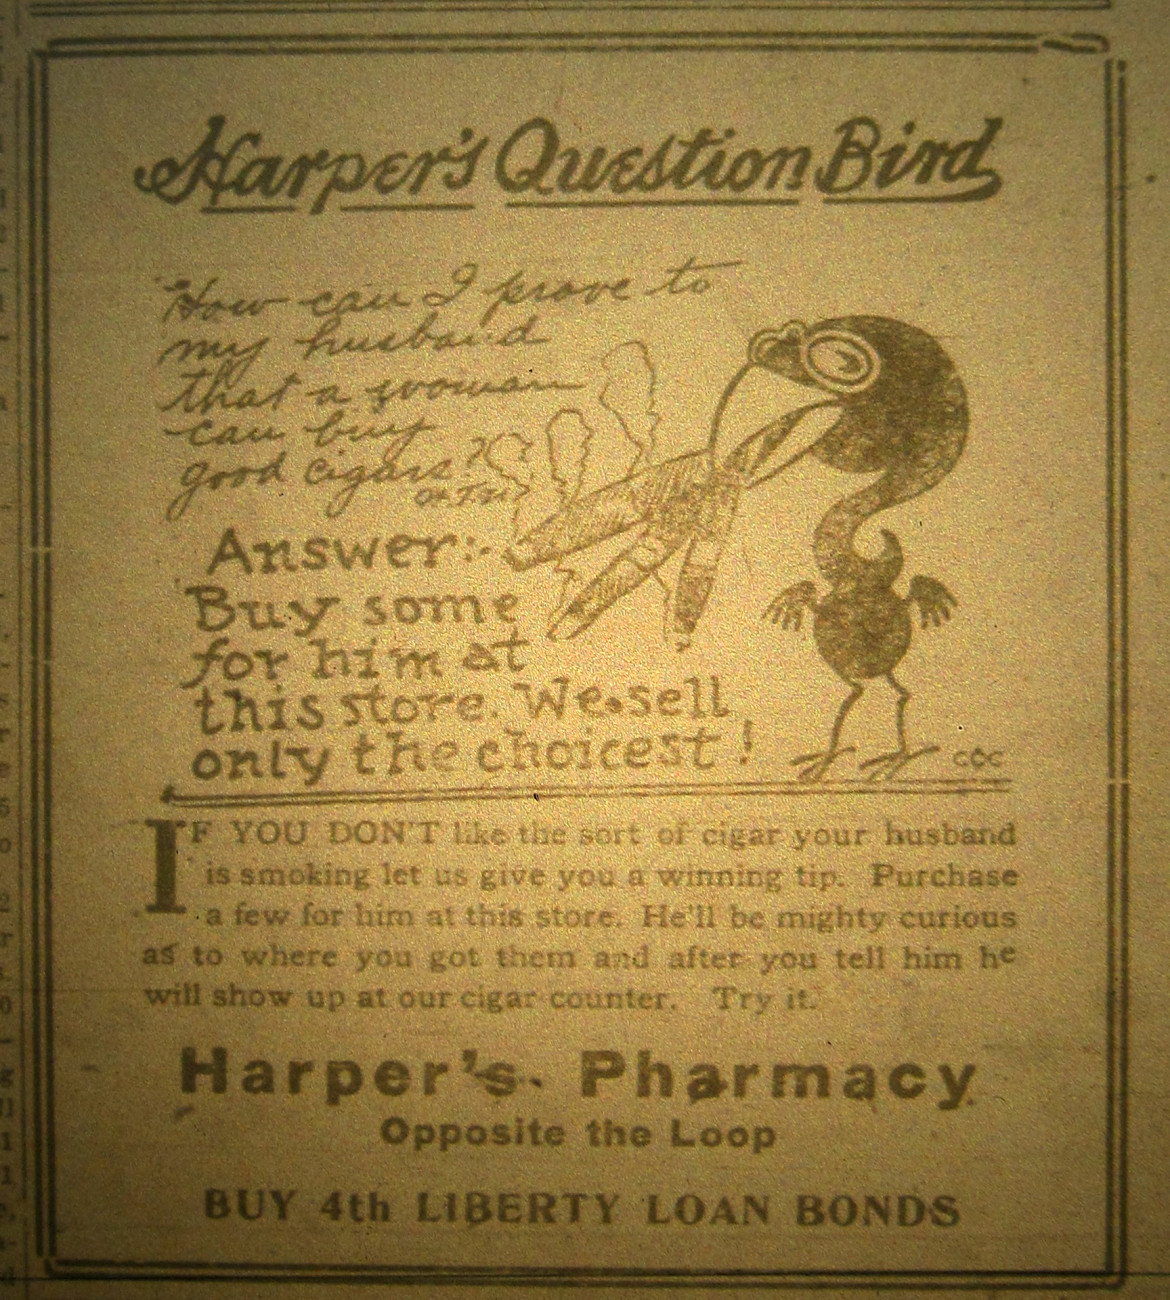 Harper's Pharmacy cigar ad from the 1916 Maplewood News-Champion.